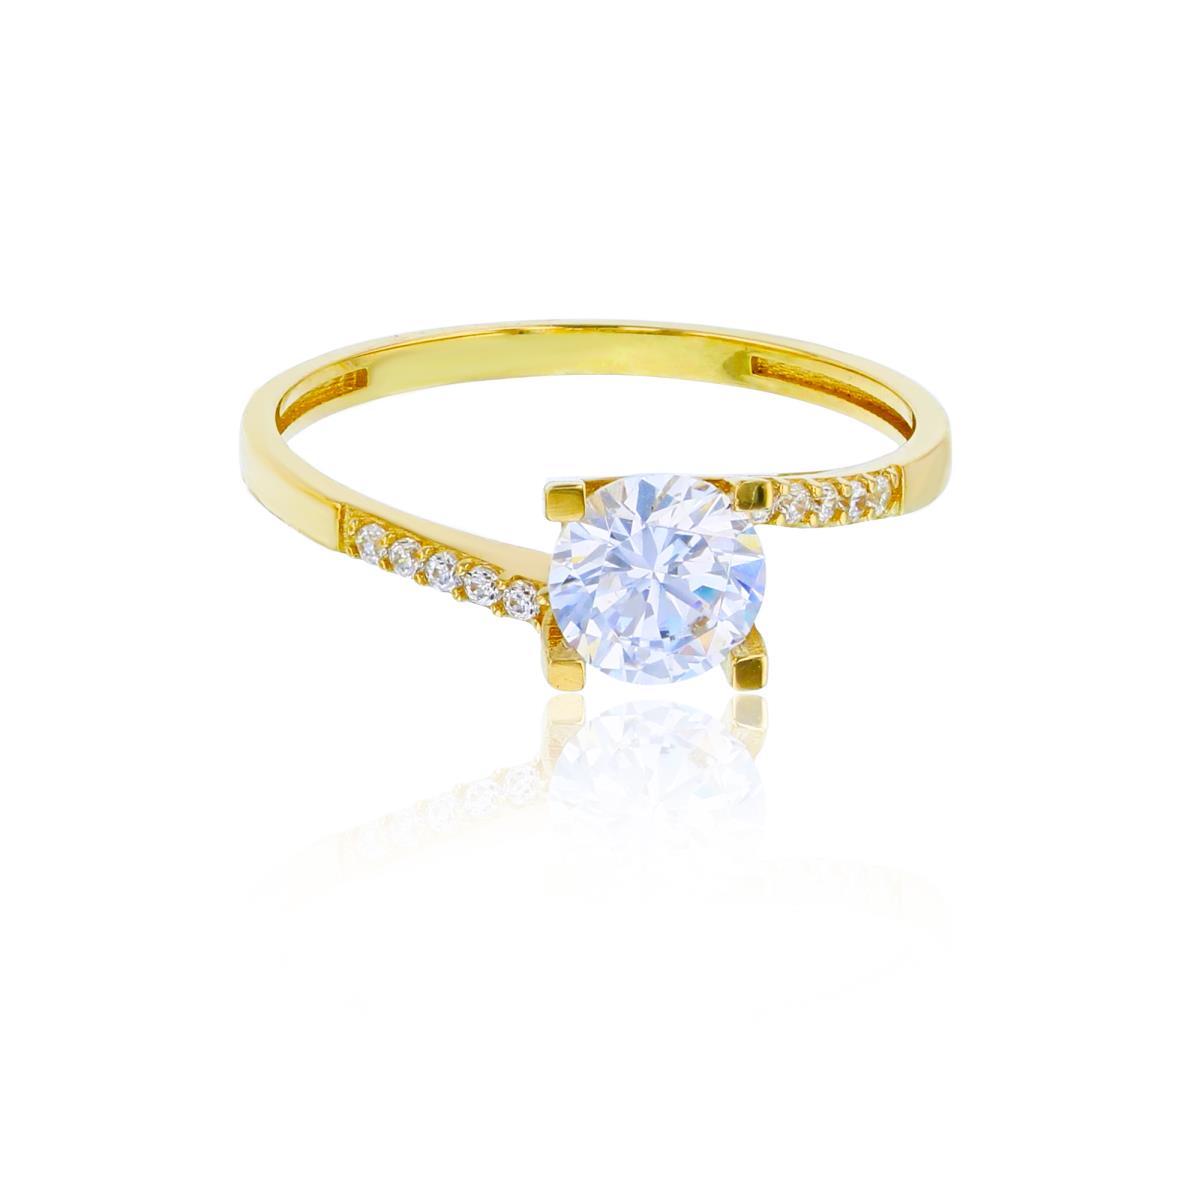 10K Yellow Gold 5.75mm Round Cut Bypass Engagement Ring